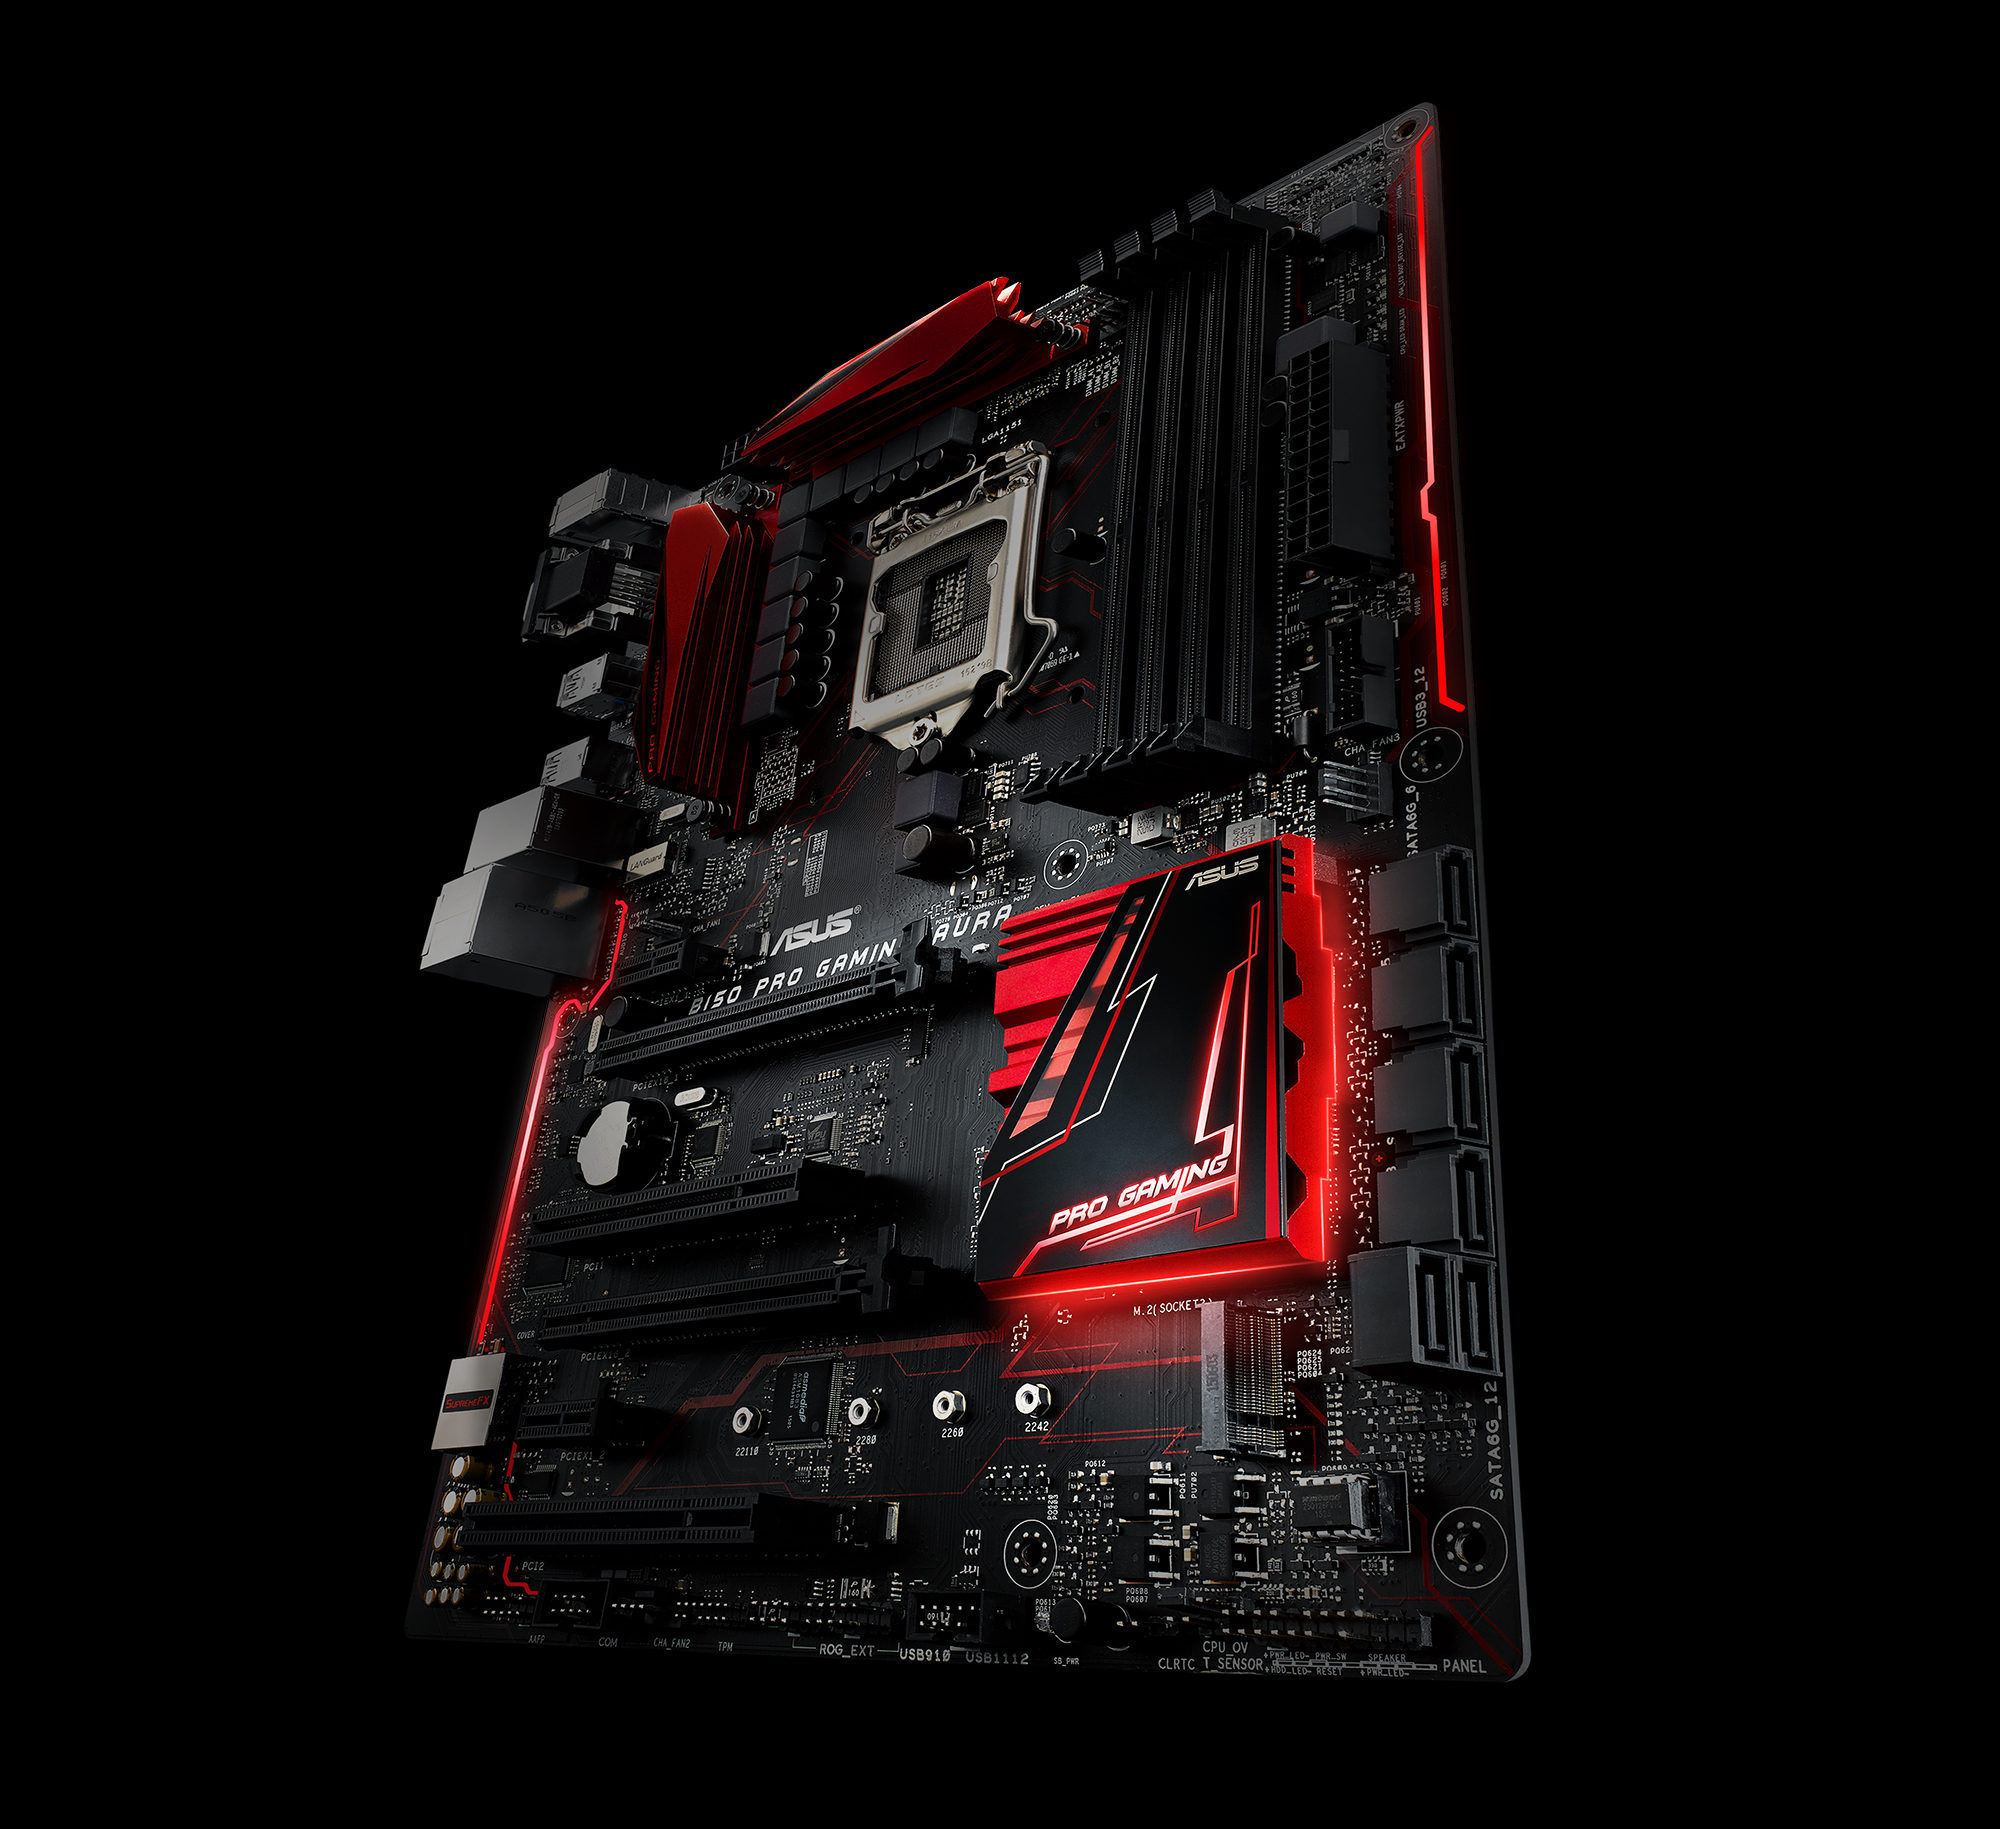 Media asset in full size related to 3dfxzone.it news item entitled as follows: ASUS lancia le motherboard B150 Pro Gaming/Aura e B150 Pro Gaming | Image Name: news23356_ASUS-B150-Pro-Gaming-Aura_2.jpg